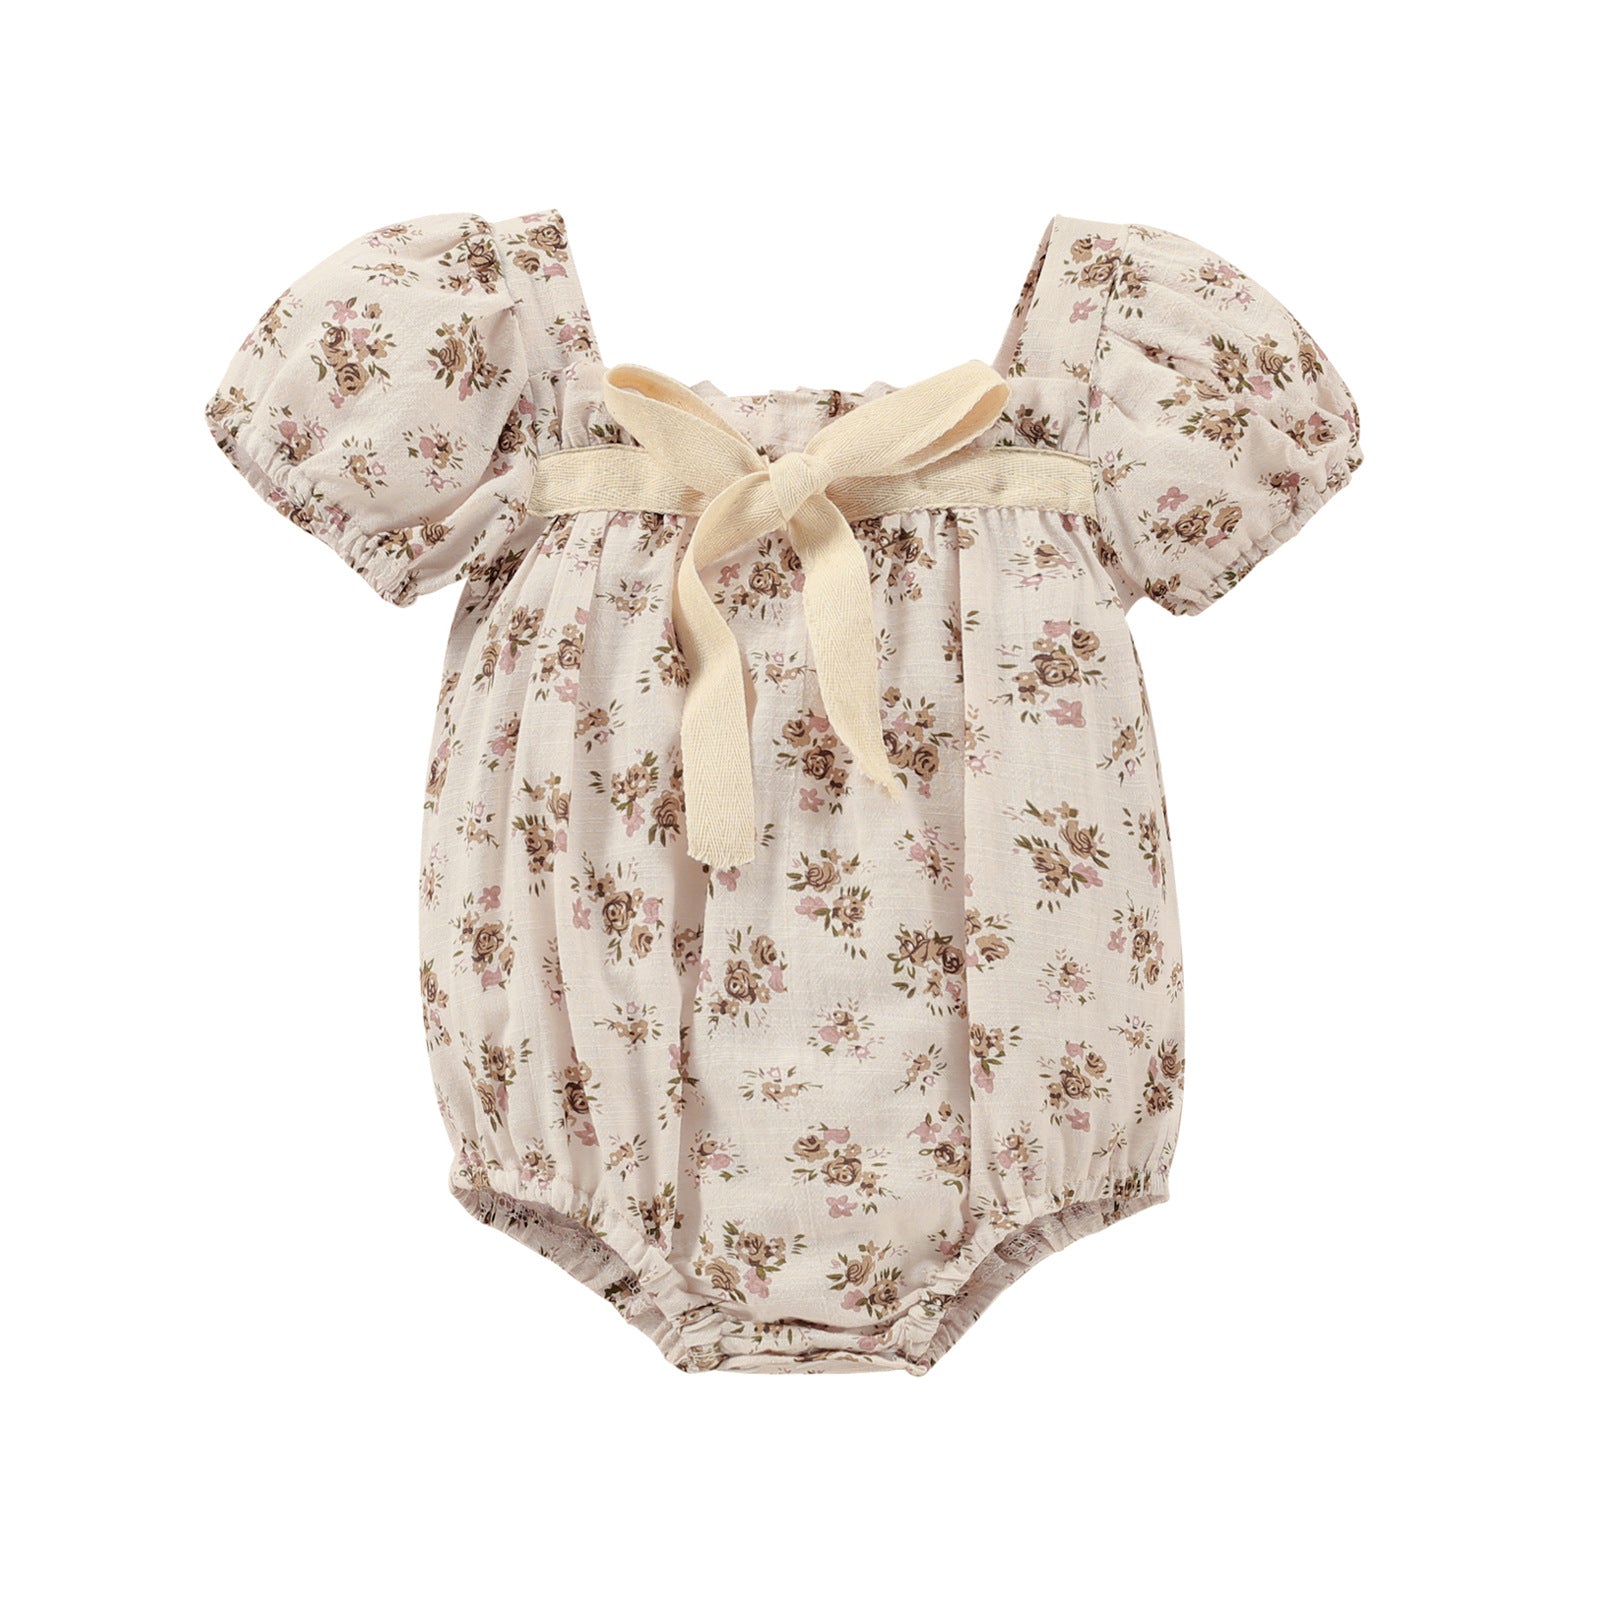 Cute Little Floral Rompers.